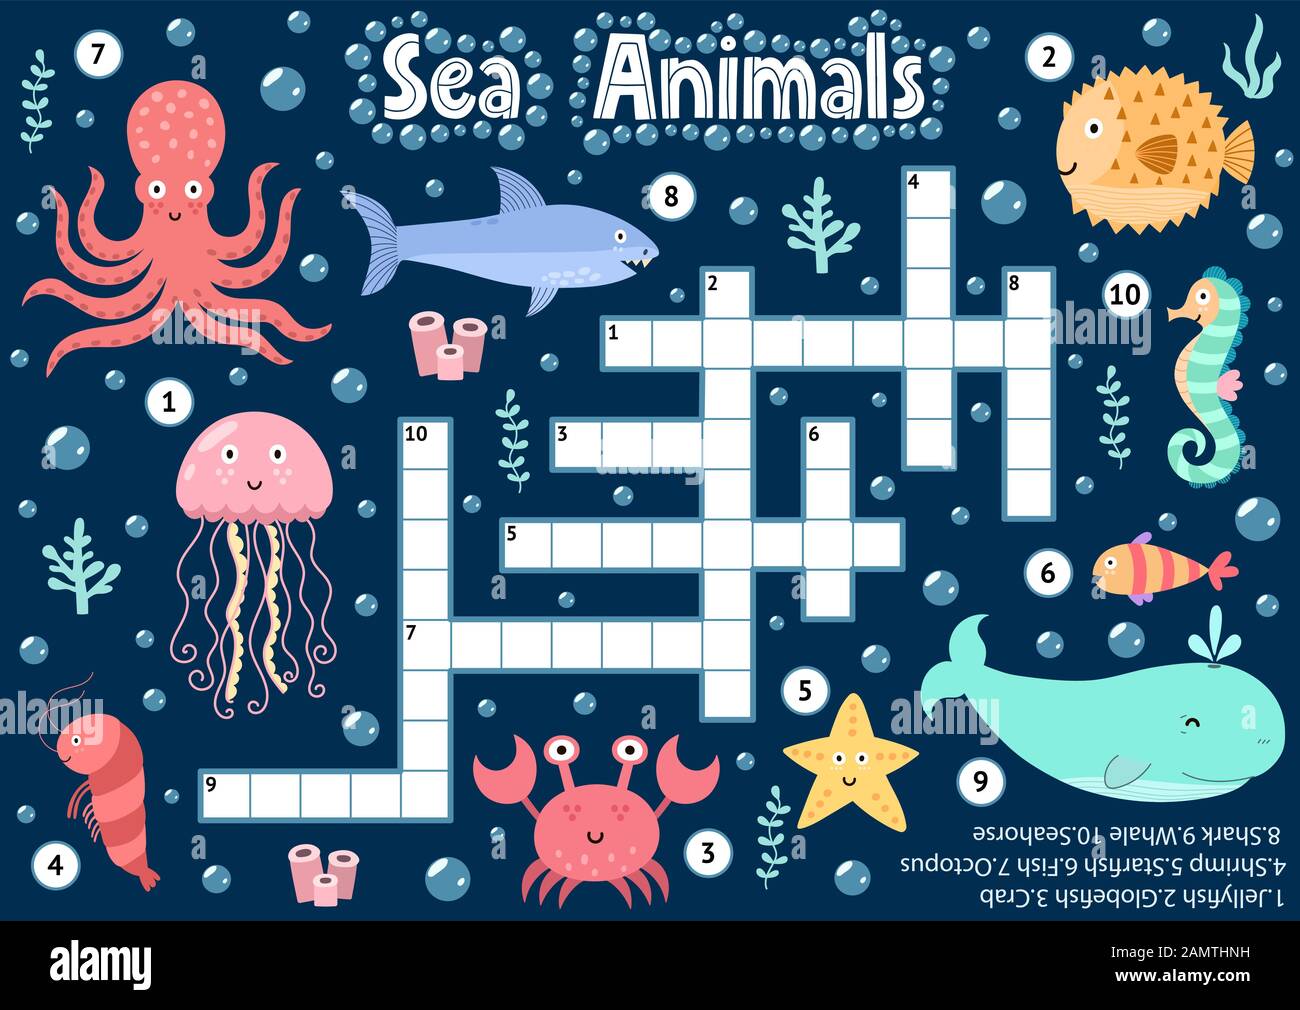 Crossword puzzle game of sea animals for kids. Underwater logical activity sheet Stock Vector